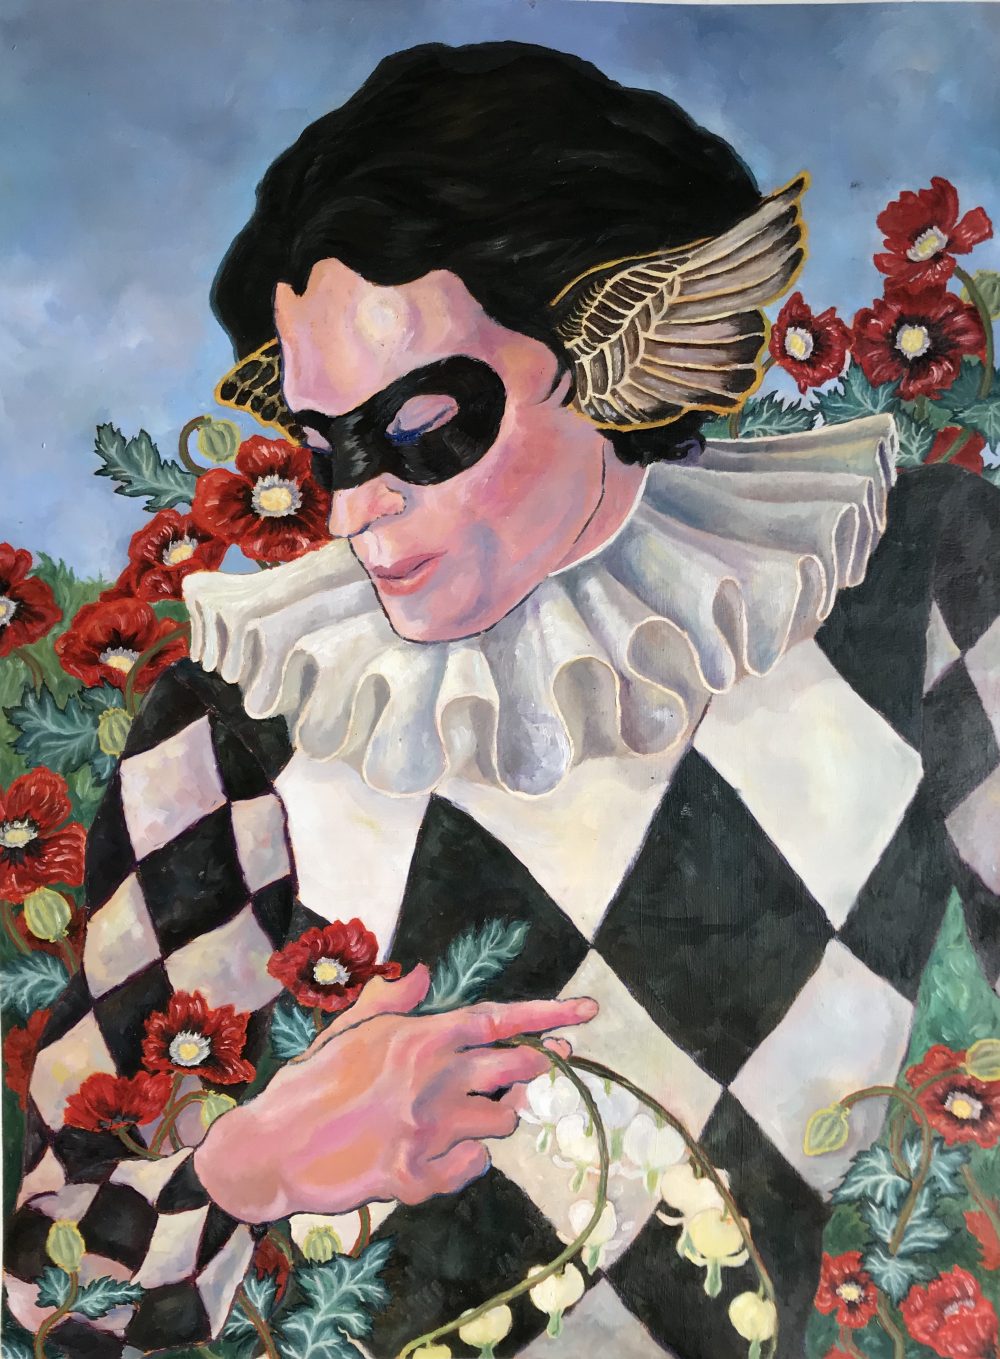 A painting in portrait format of a young man, face and torso visible, wearing a domino mask, harlequin print top, and neck ruff, surrounded by red poppy flowers.